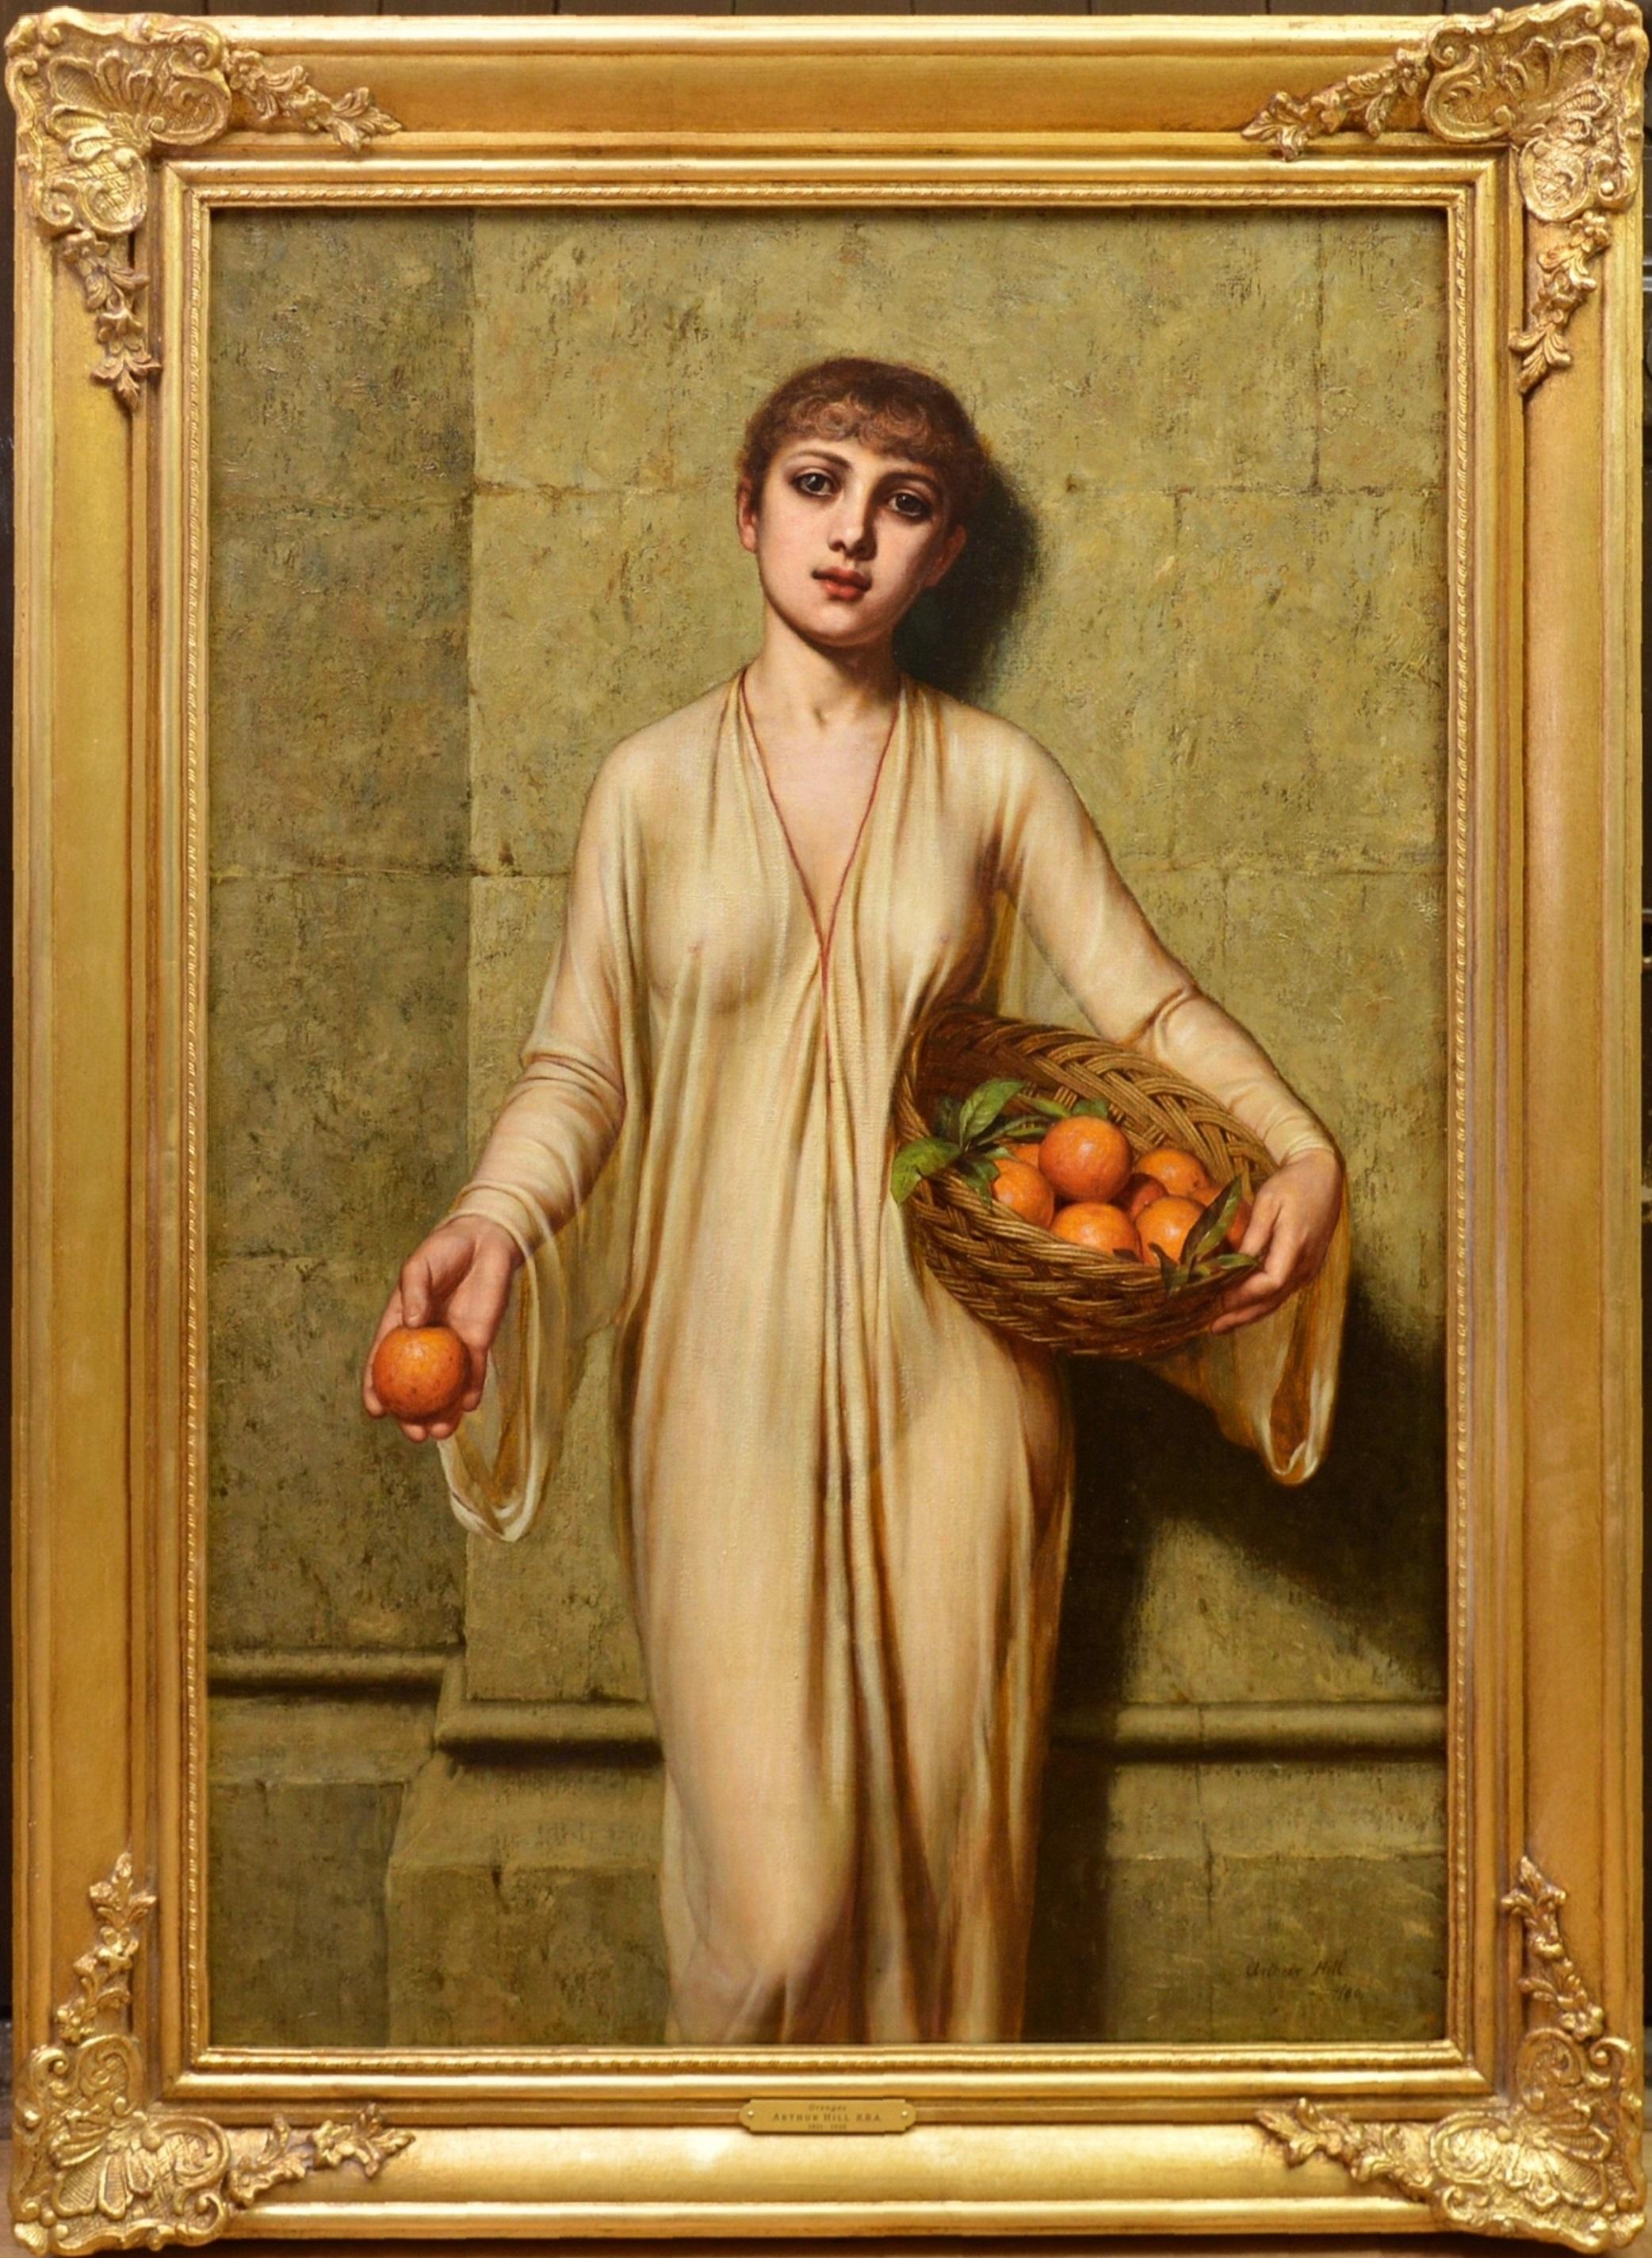 Arthur Hill Figurative Painting - Oranges - 19th Century Neoclassical Portrait Oil Painting of Young Roman Girl